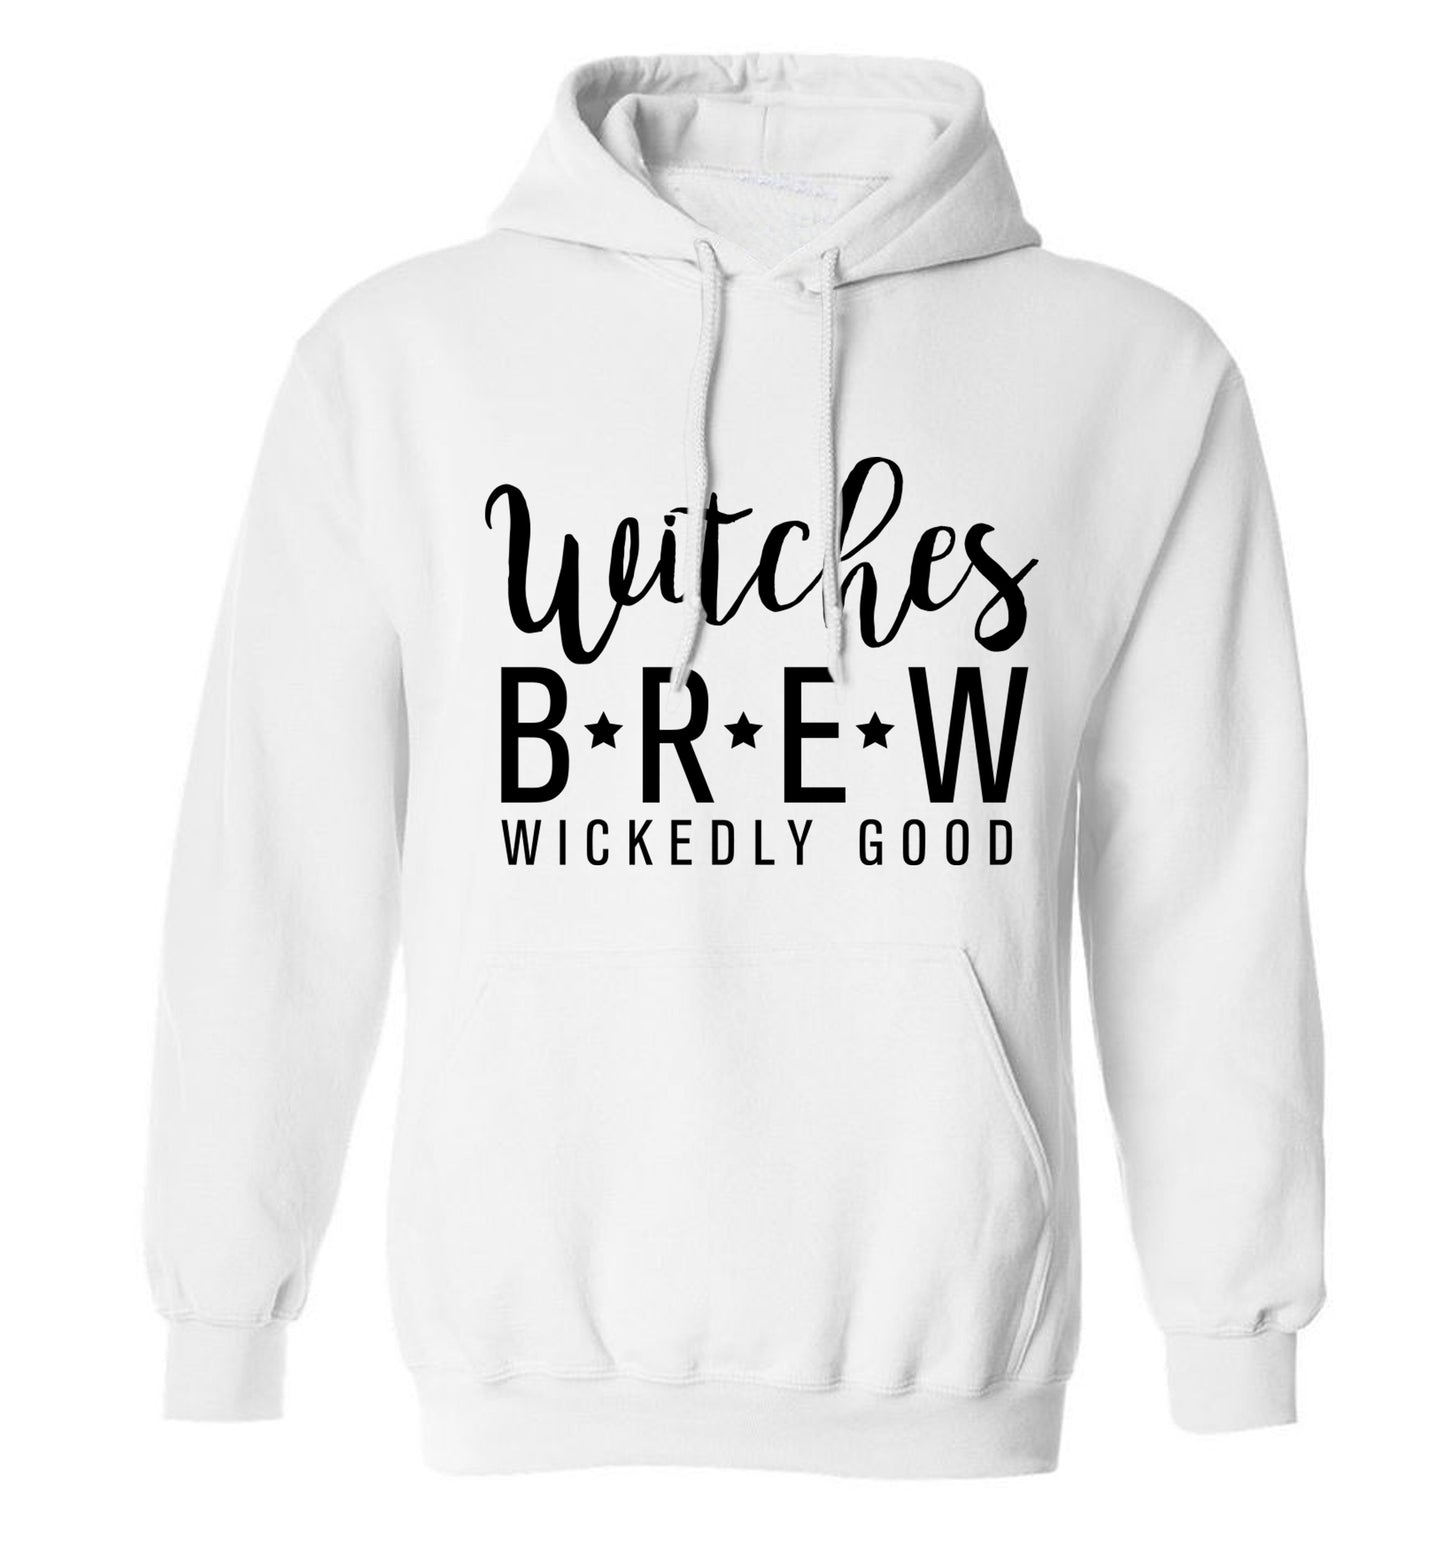 Witches Brew wickedly good adults unisex white hoodie 2XL